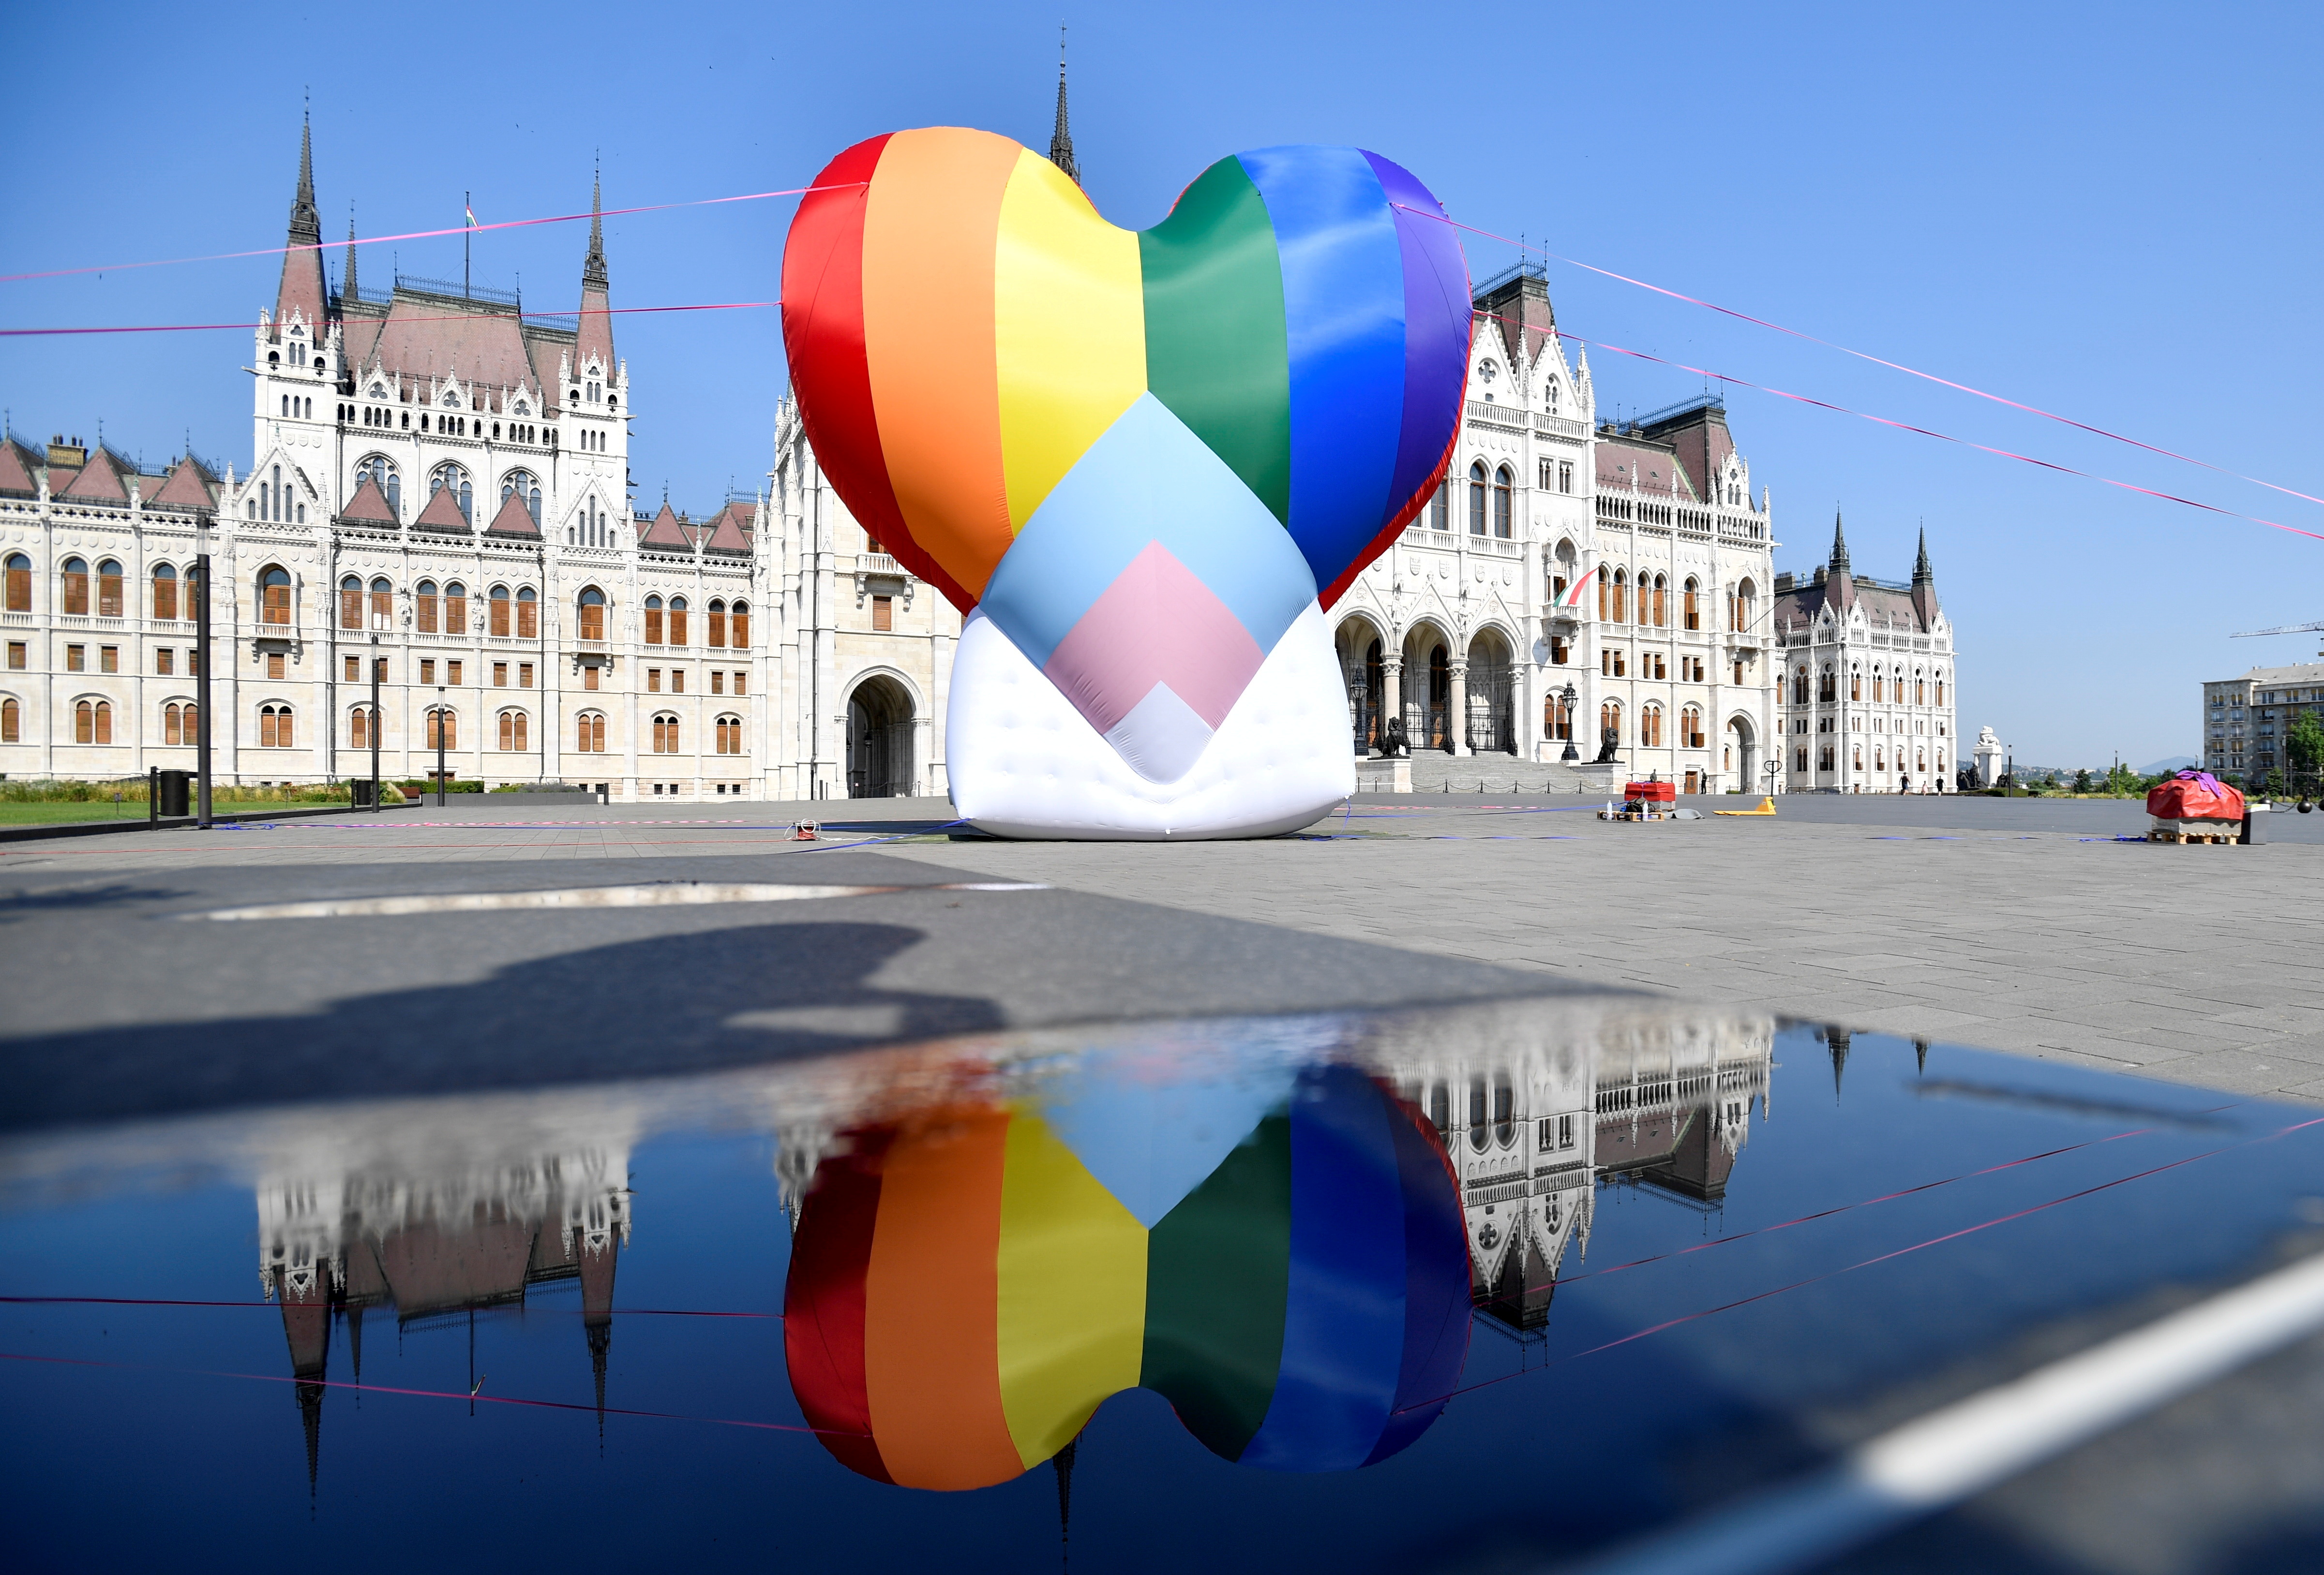 A huge rainbow baloon put up by members of Amnesty International and Hatter, an NGO promoting LGBT rights, is seen at Hungary's parliament in protest against anti-LGBT law in Budapest, Hungary, July 8, 2021. REUTERS/Marton Monus